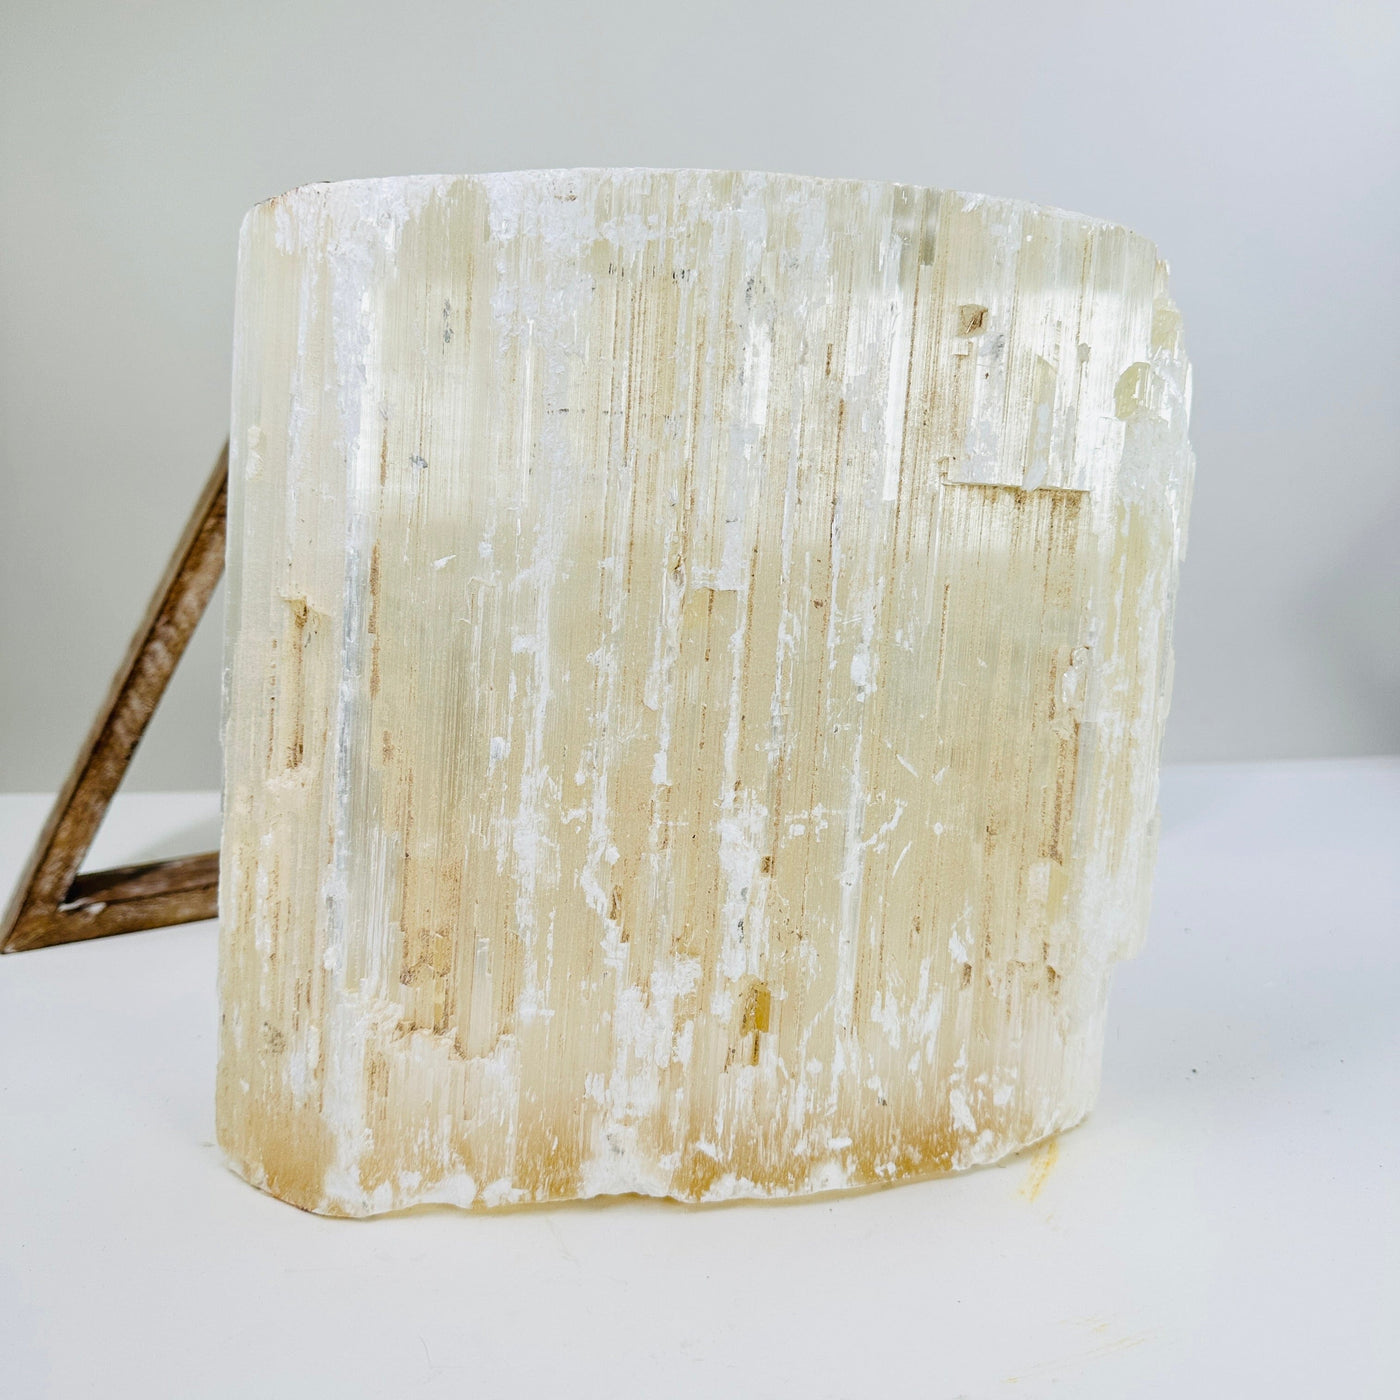 selenite cluster with decorations in the background